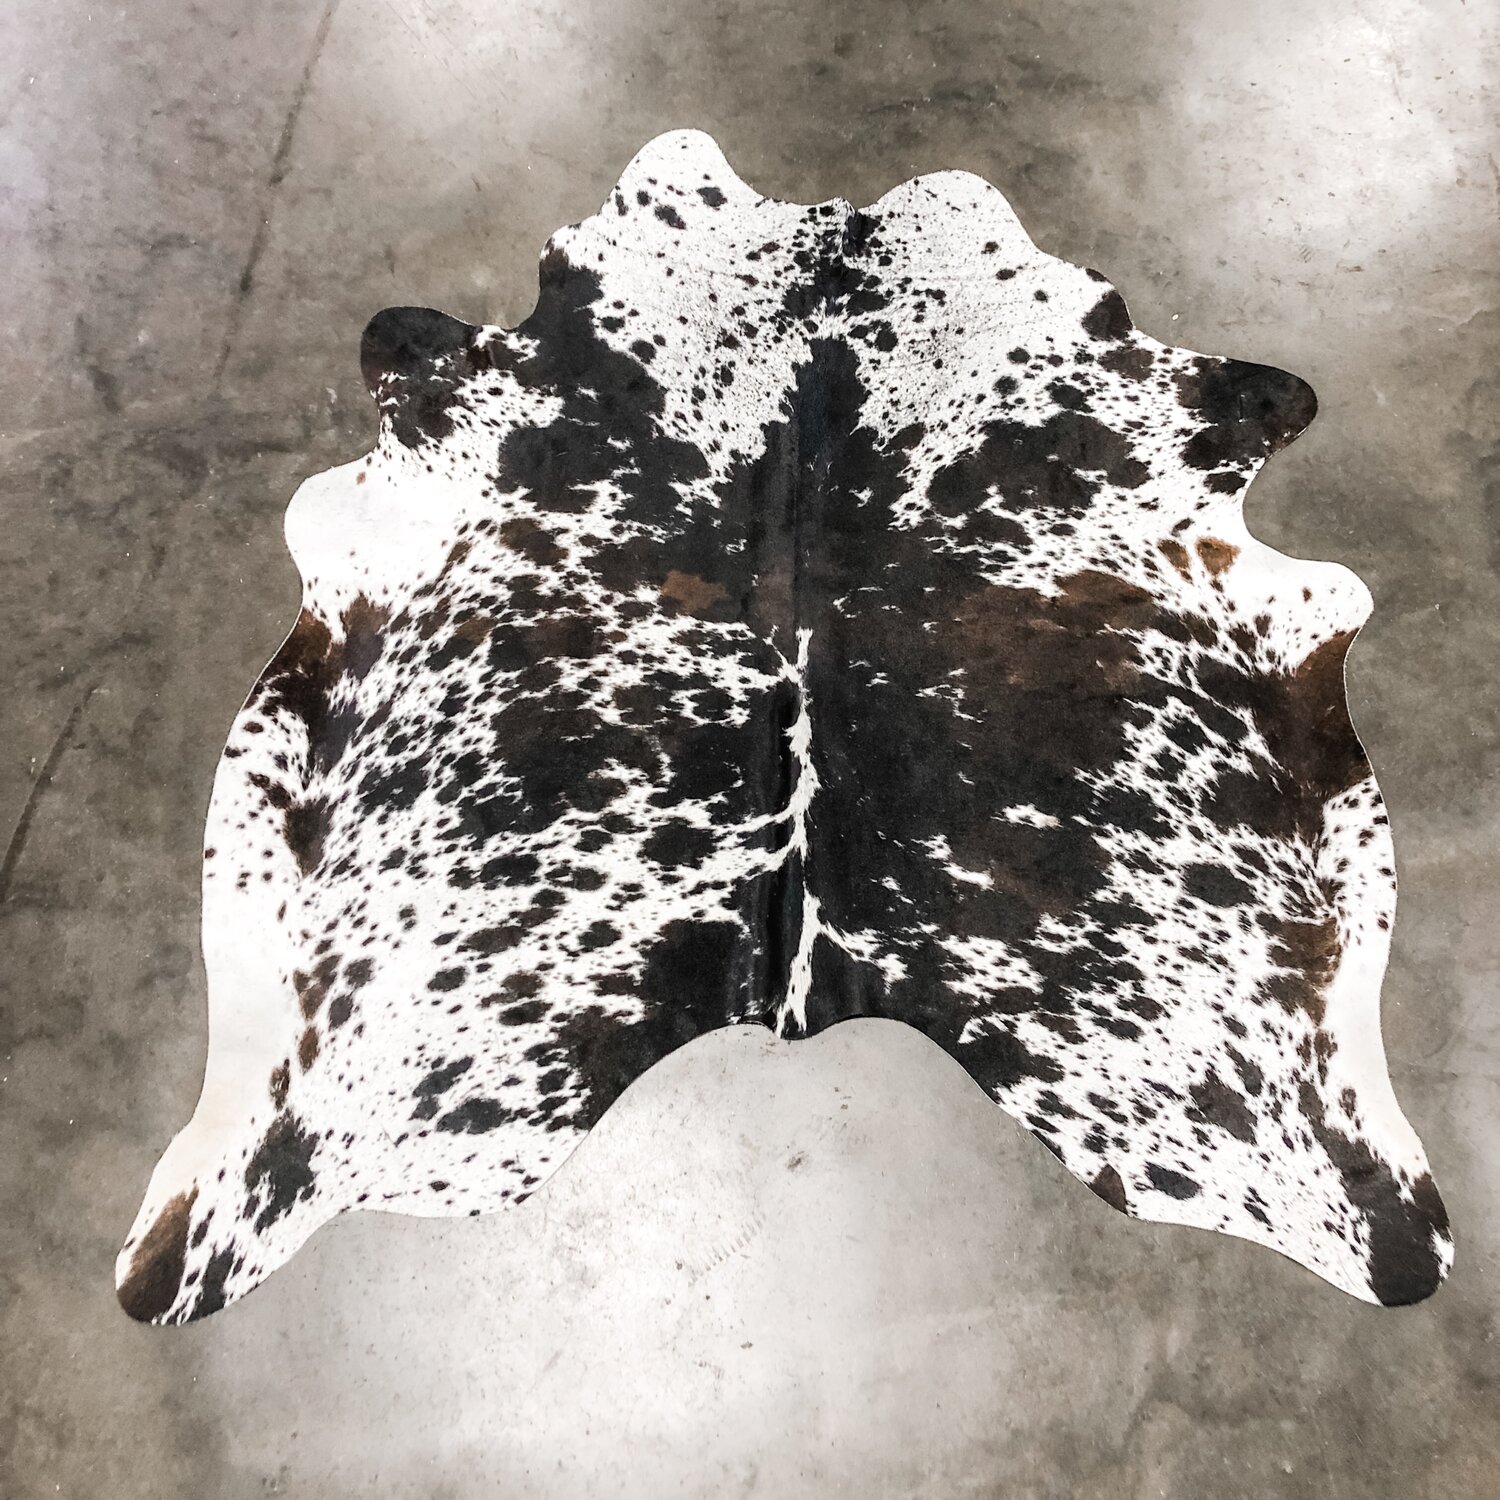 Coasters - Set of 2 - Tricolor Spotted Cowhide — Farmericana Designs